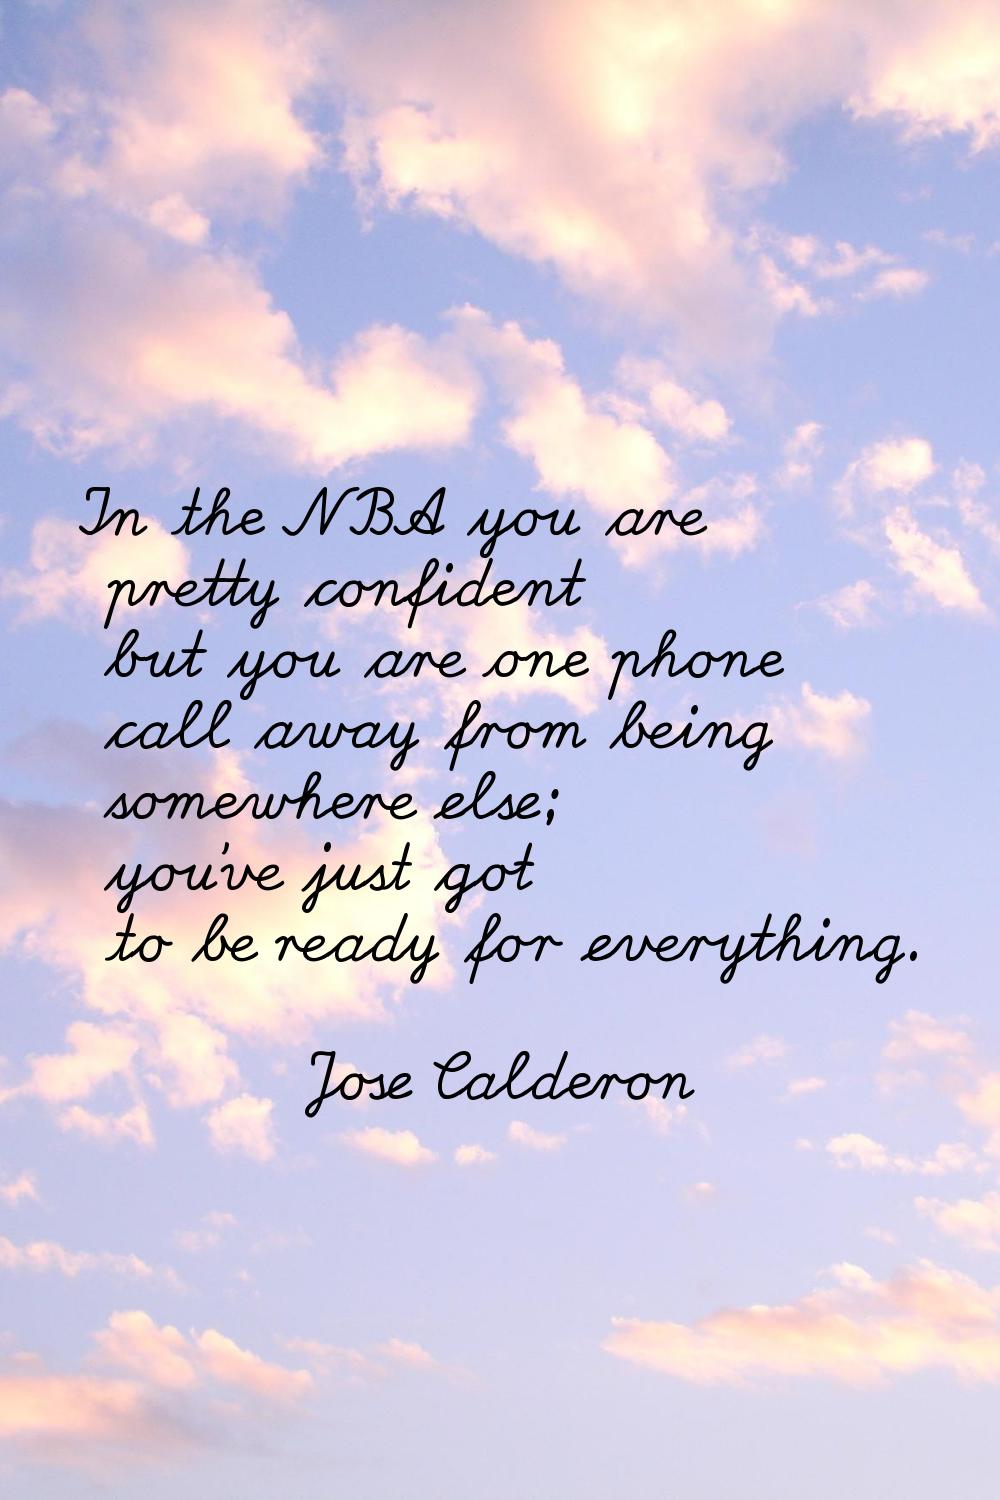 In the NBA you are pretty confident but you are one phone call away from being somewhere else; you'